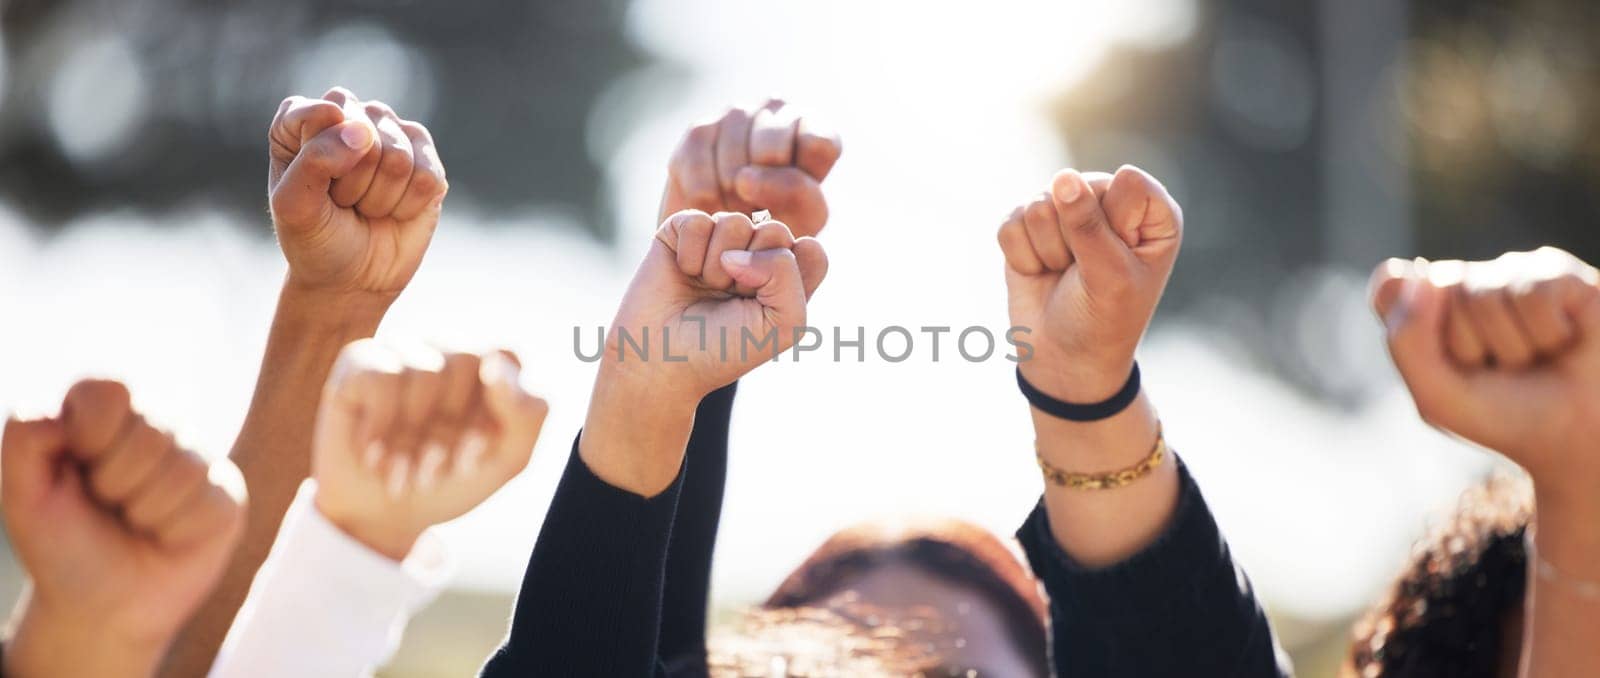 Closeup, group and protest with solidarity, hands and support for human rights, equality or freedom. Zoom, community or protesters with teamwork, activism or union with empowerment, outdoor and crowd.